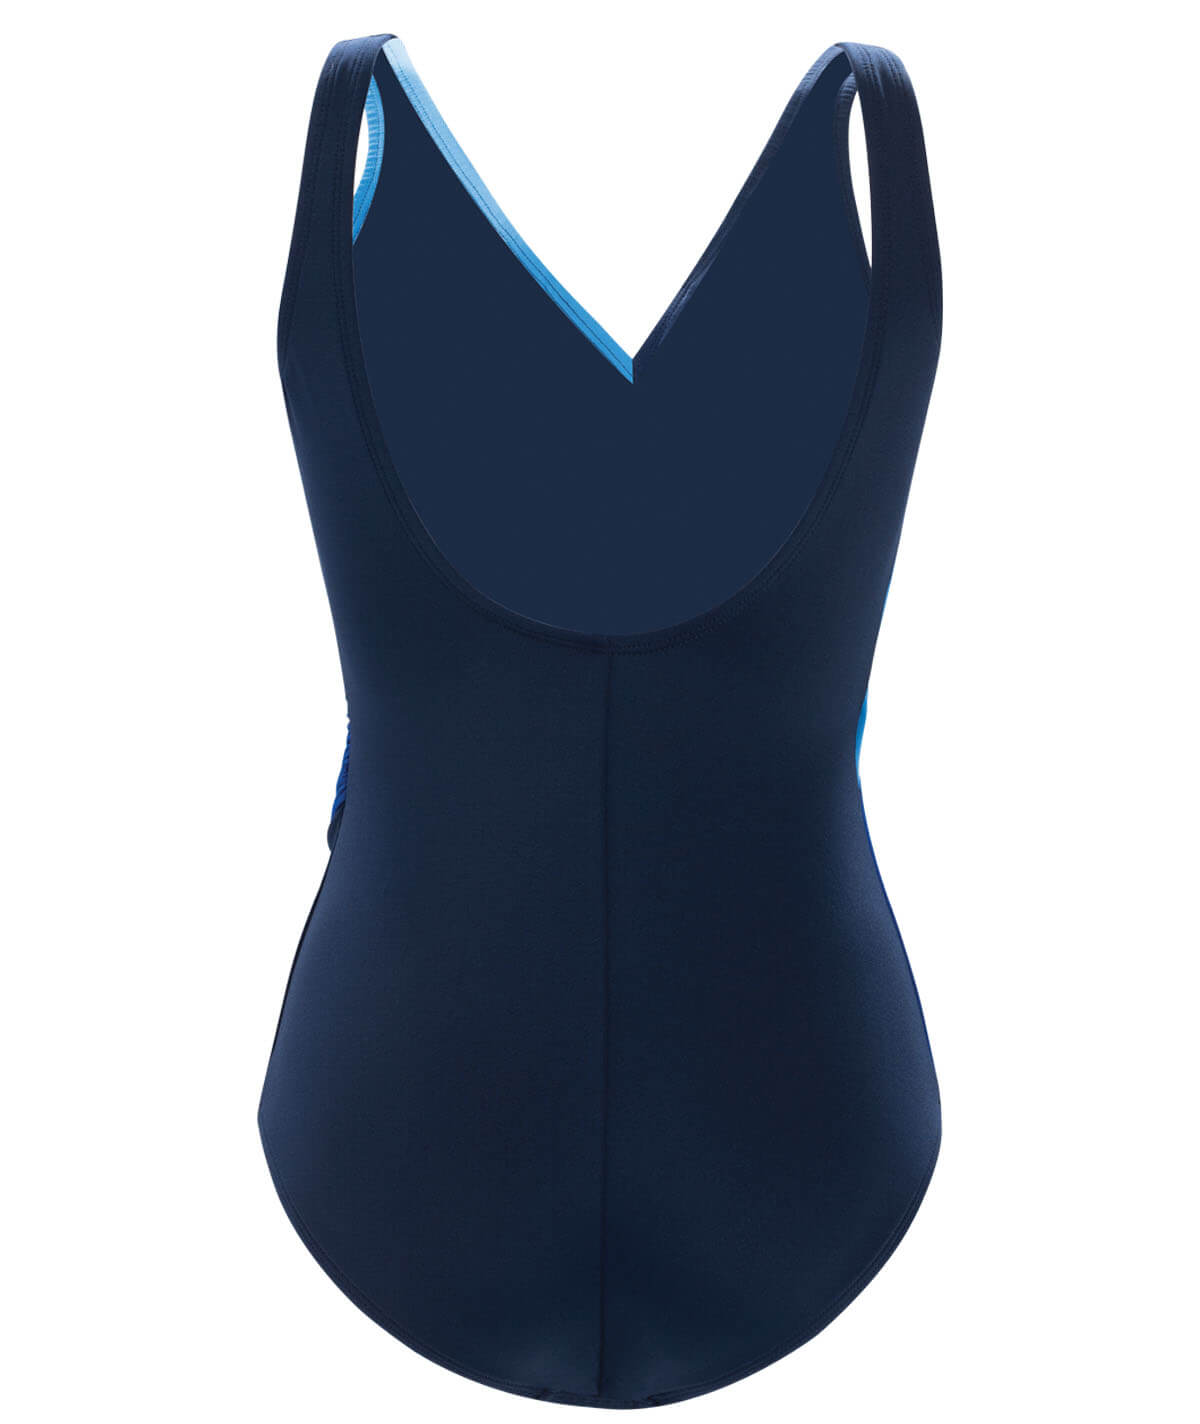 Aquashape Women's Color Block Moderate Ruched Front One Piece Swimsuit